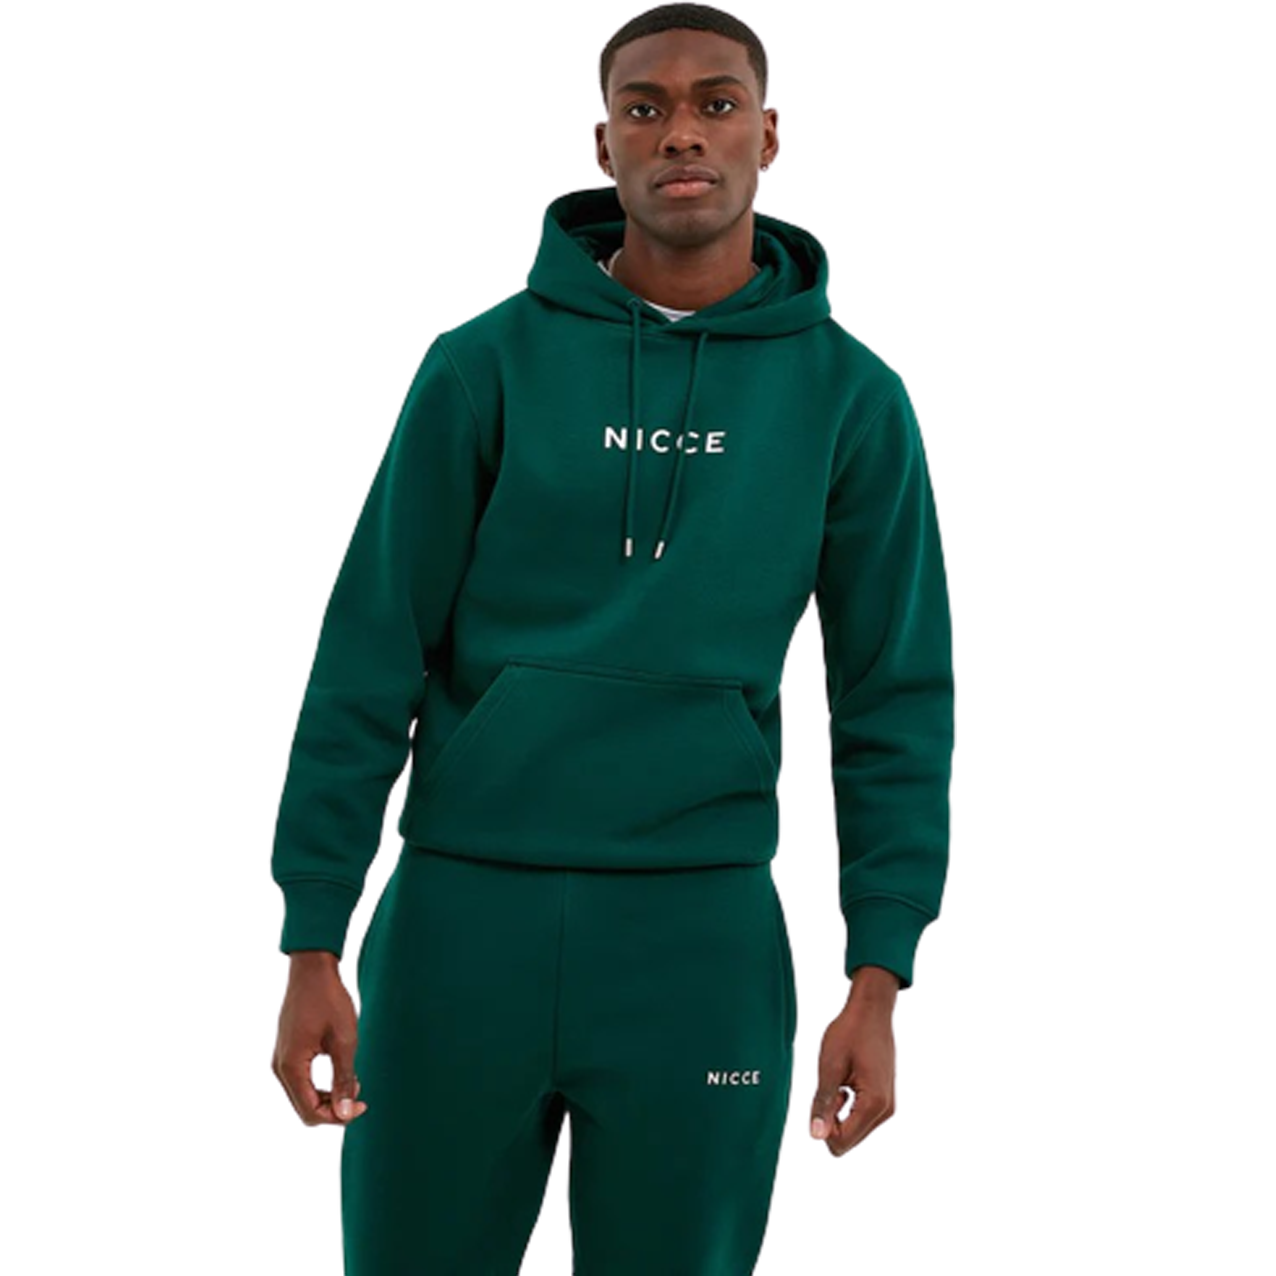 NICCE CENTRE LOGO OH HOODIE IVY GREEN 0125-K008-0769